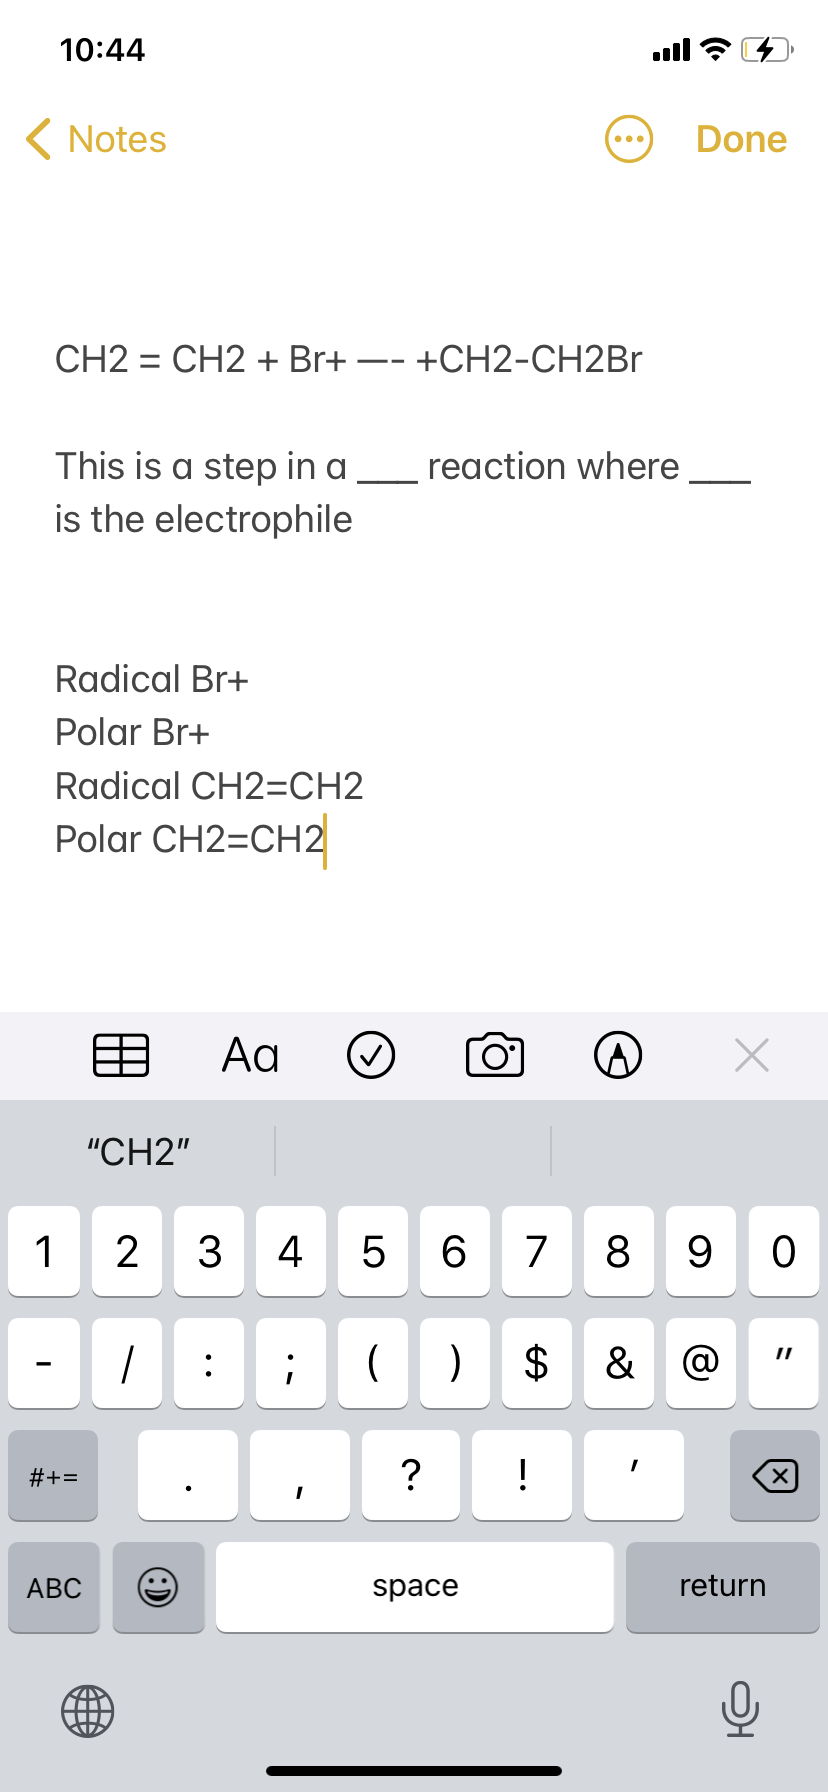 10:44
ull ?
( Notes
Done
CH2 = CH2 + Br+ -- +CH2-CH2BR
This is a step in a
is the electrophile
reaction where
Radical Br+
Polar Br+
Radical CH2=CH2
Polar CH2=CH2
Aa
"CH2"
1
2
3
4
7
8
9 0
&
#+=
?
!
АВС
space
return
%24
LO
:)
